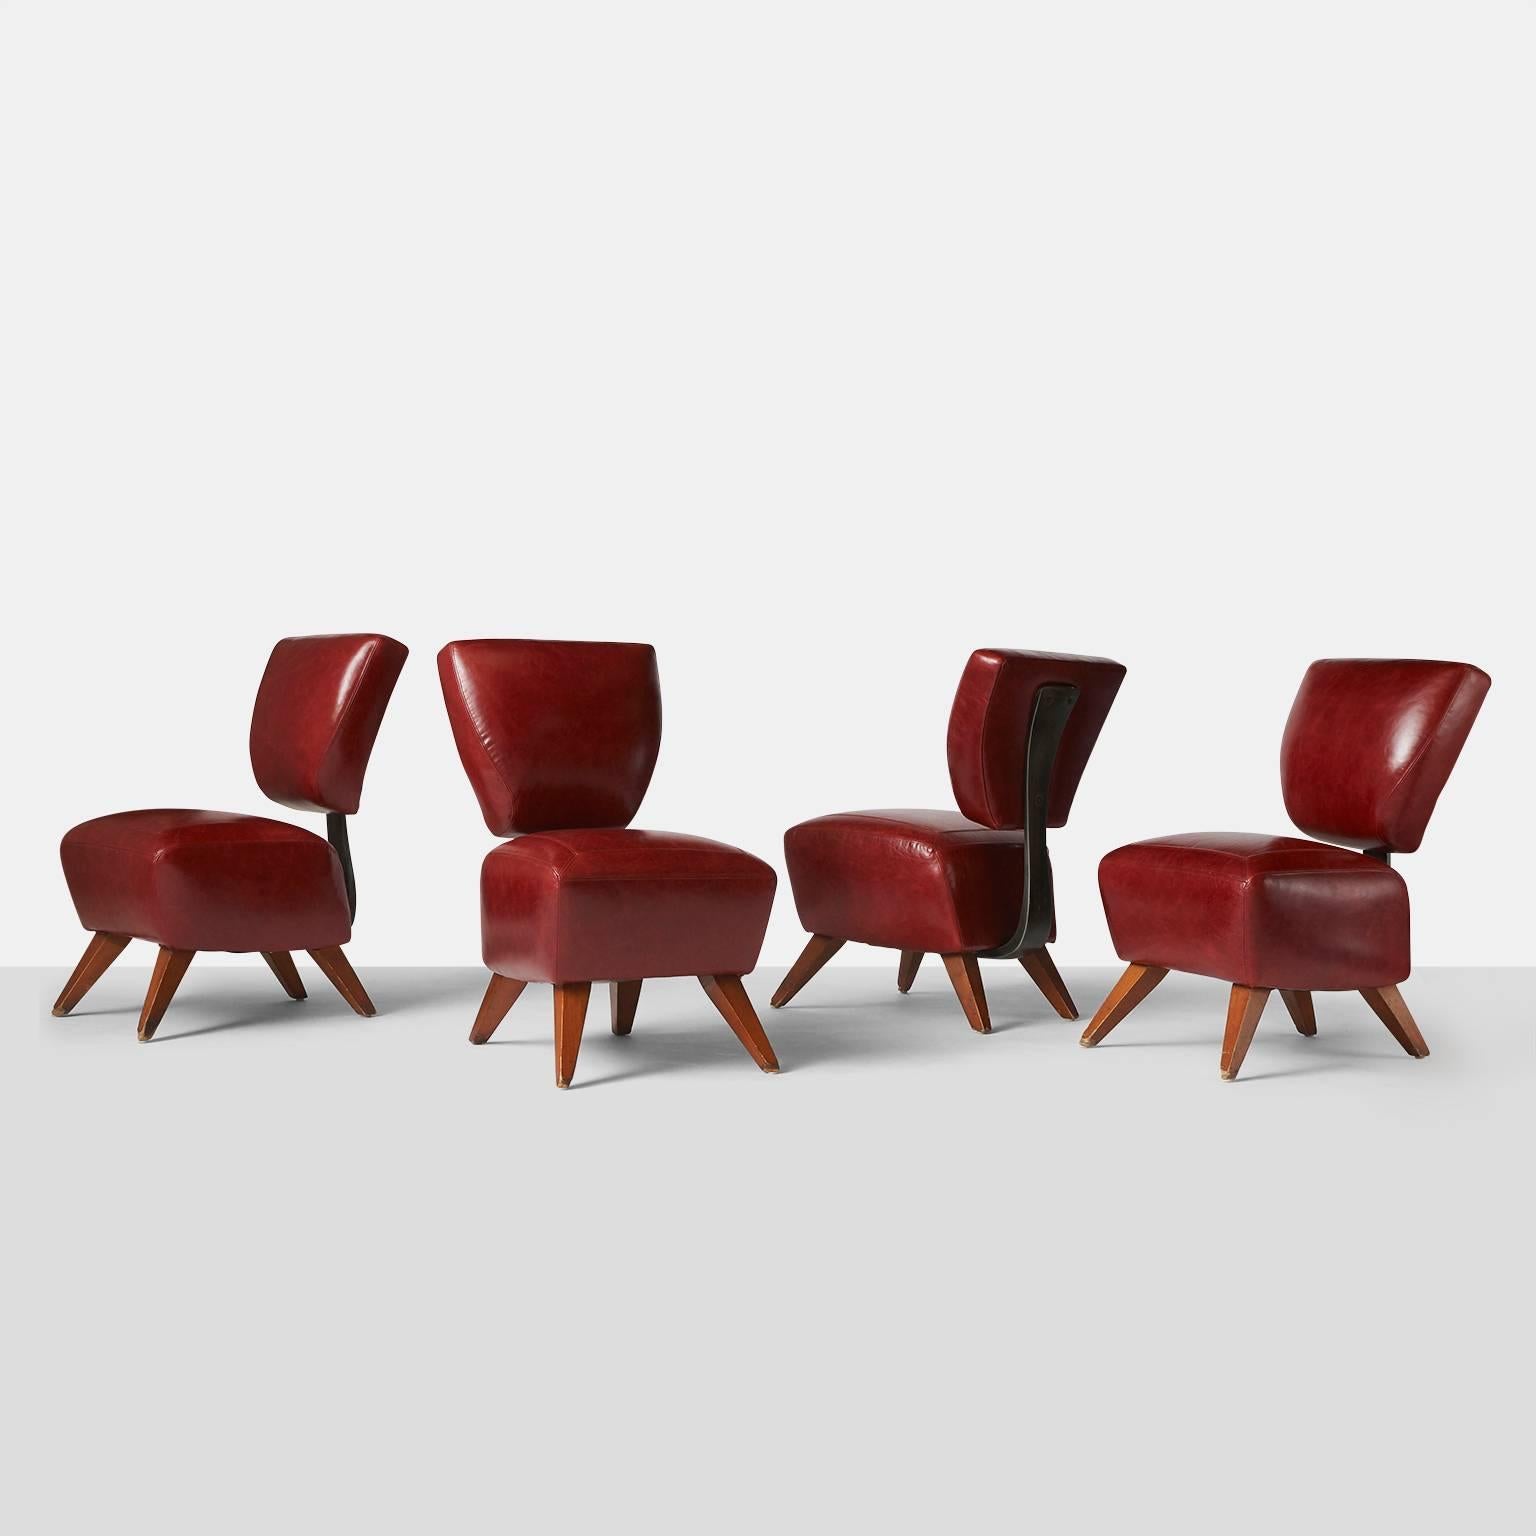 Four rare dining chairs restored in a luxurious red leather and using a molded steel plate running from under the seat to secure the back. The Fred chair was designed for the Barney’s Flagship store in NYC, 
USA, circa 1990s.